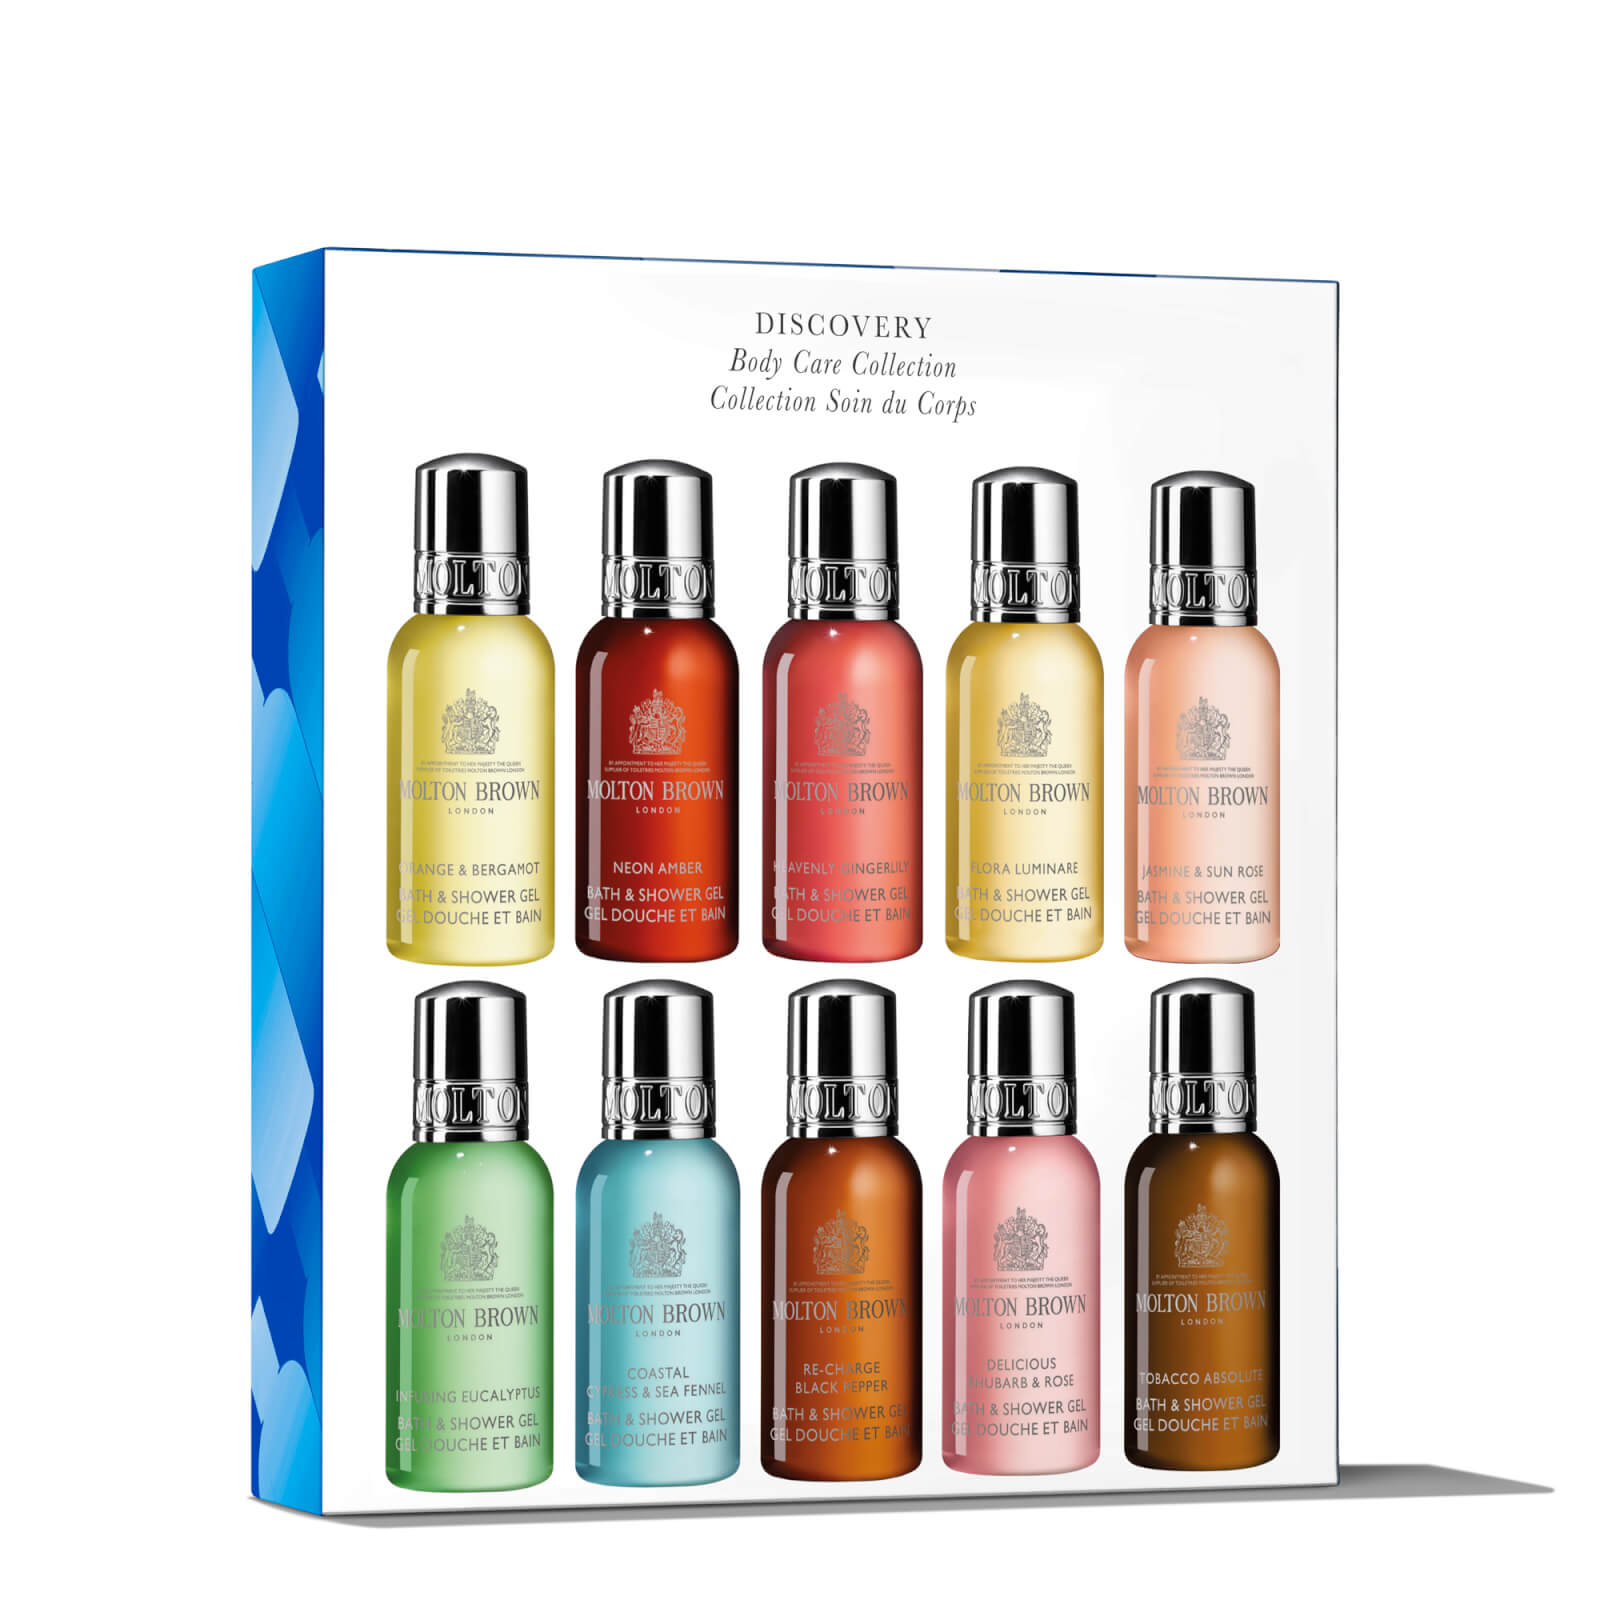 Molton Brown Discovery Body Care Set (Worth £30.00)